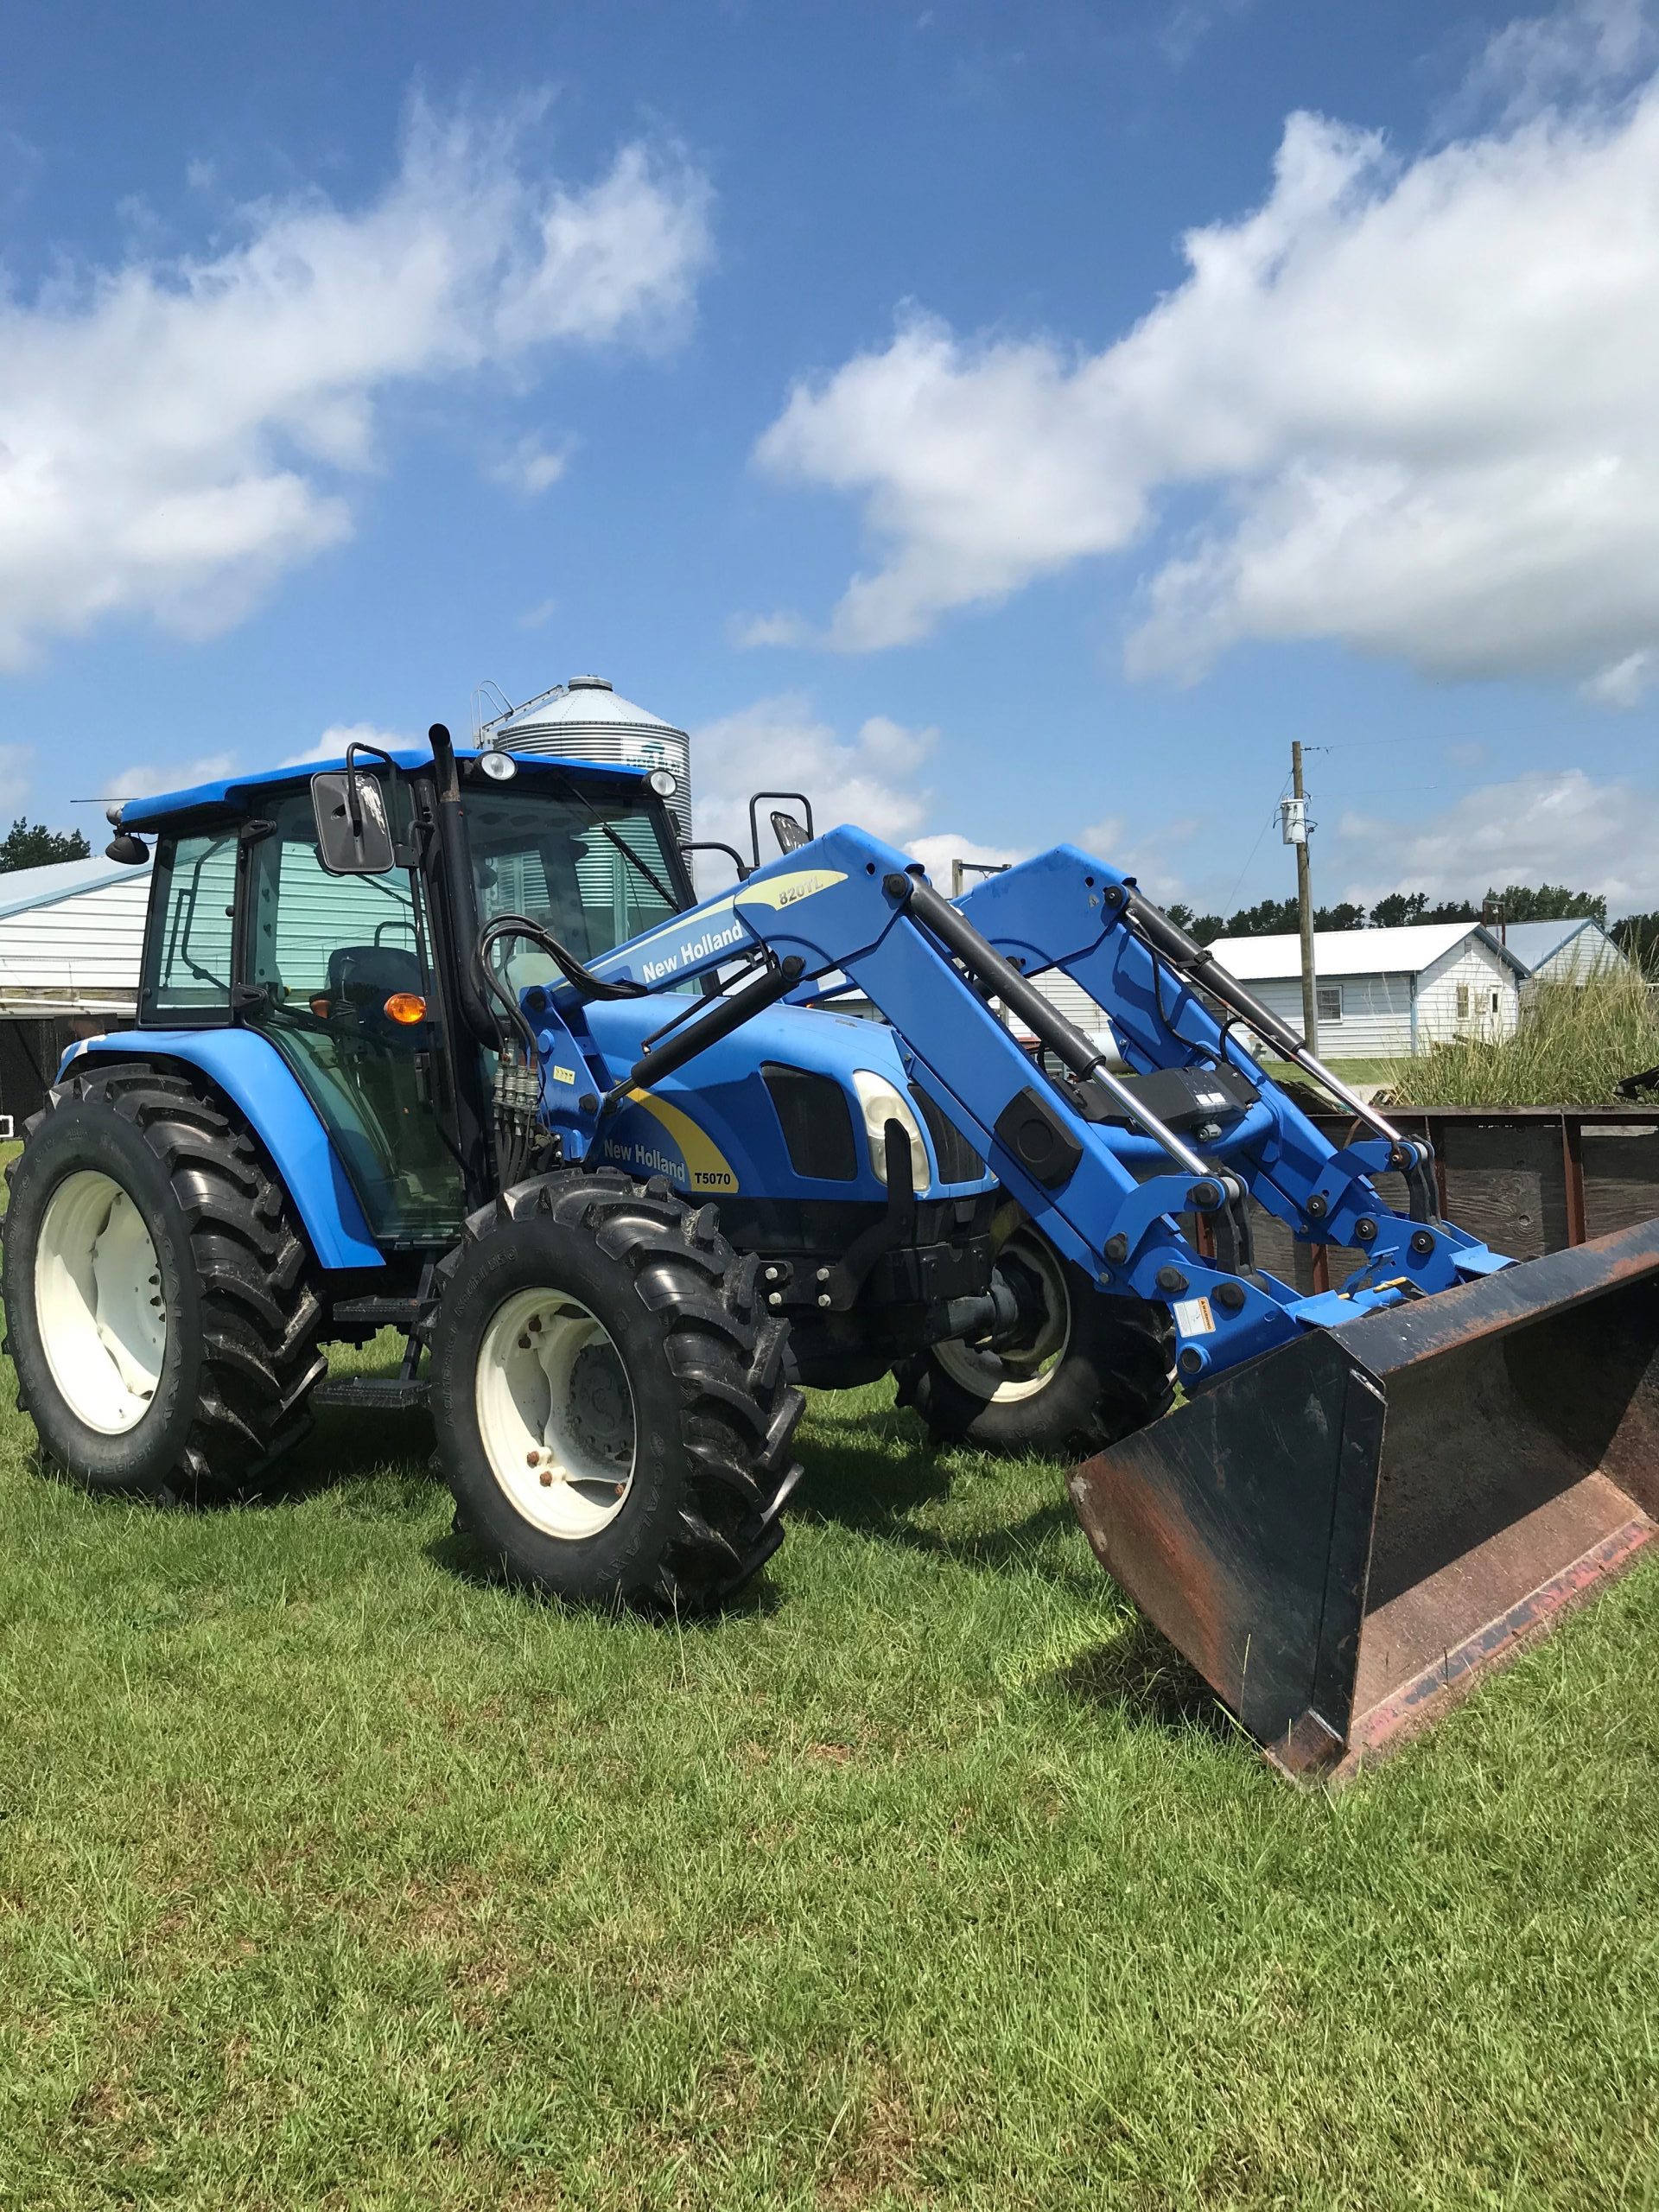 It’s important to check that tractors and equipment are available and in good working order for emergencies. Some farmers may park equipment in the middle of their fields, on high ground, to guarantee that they are easily accessible after a storm, and to prevent damage from fallen trees or power lines.